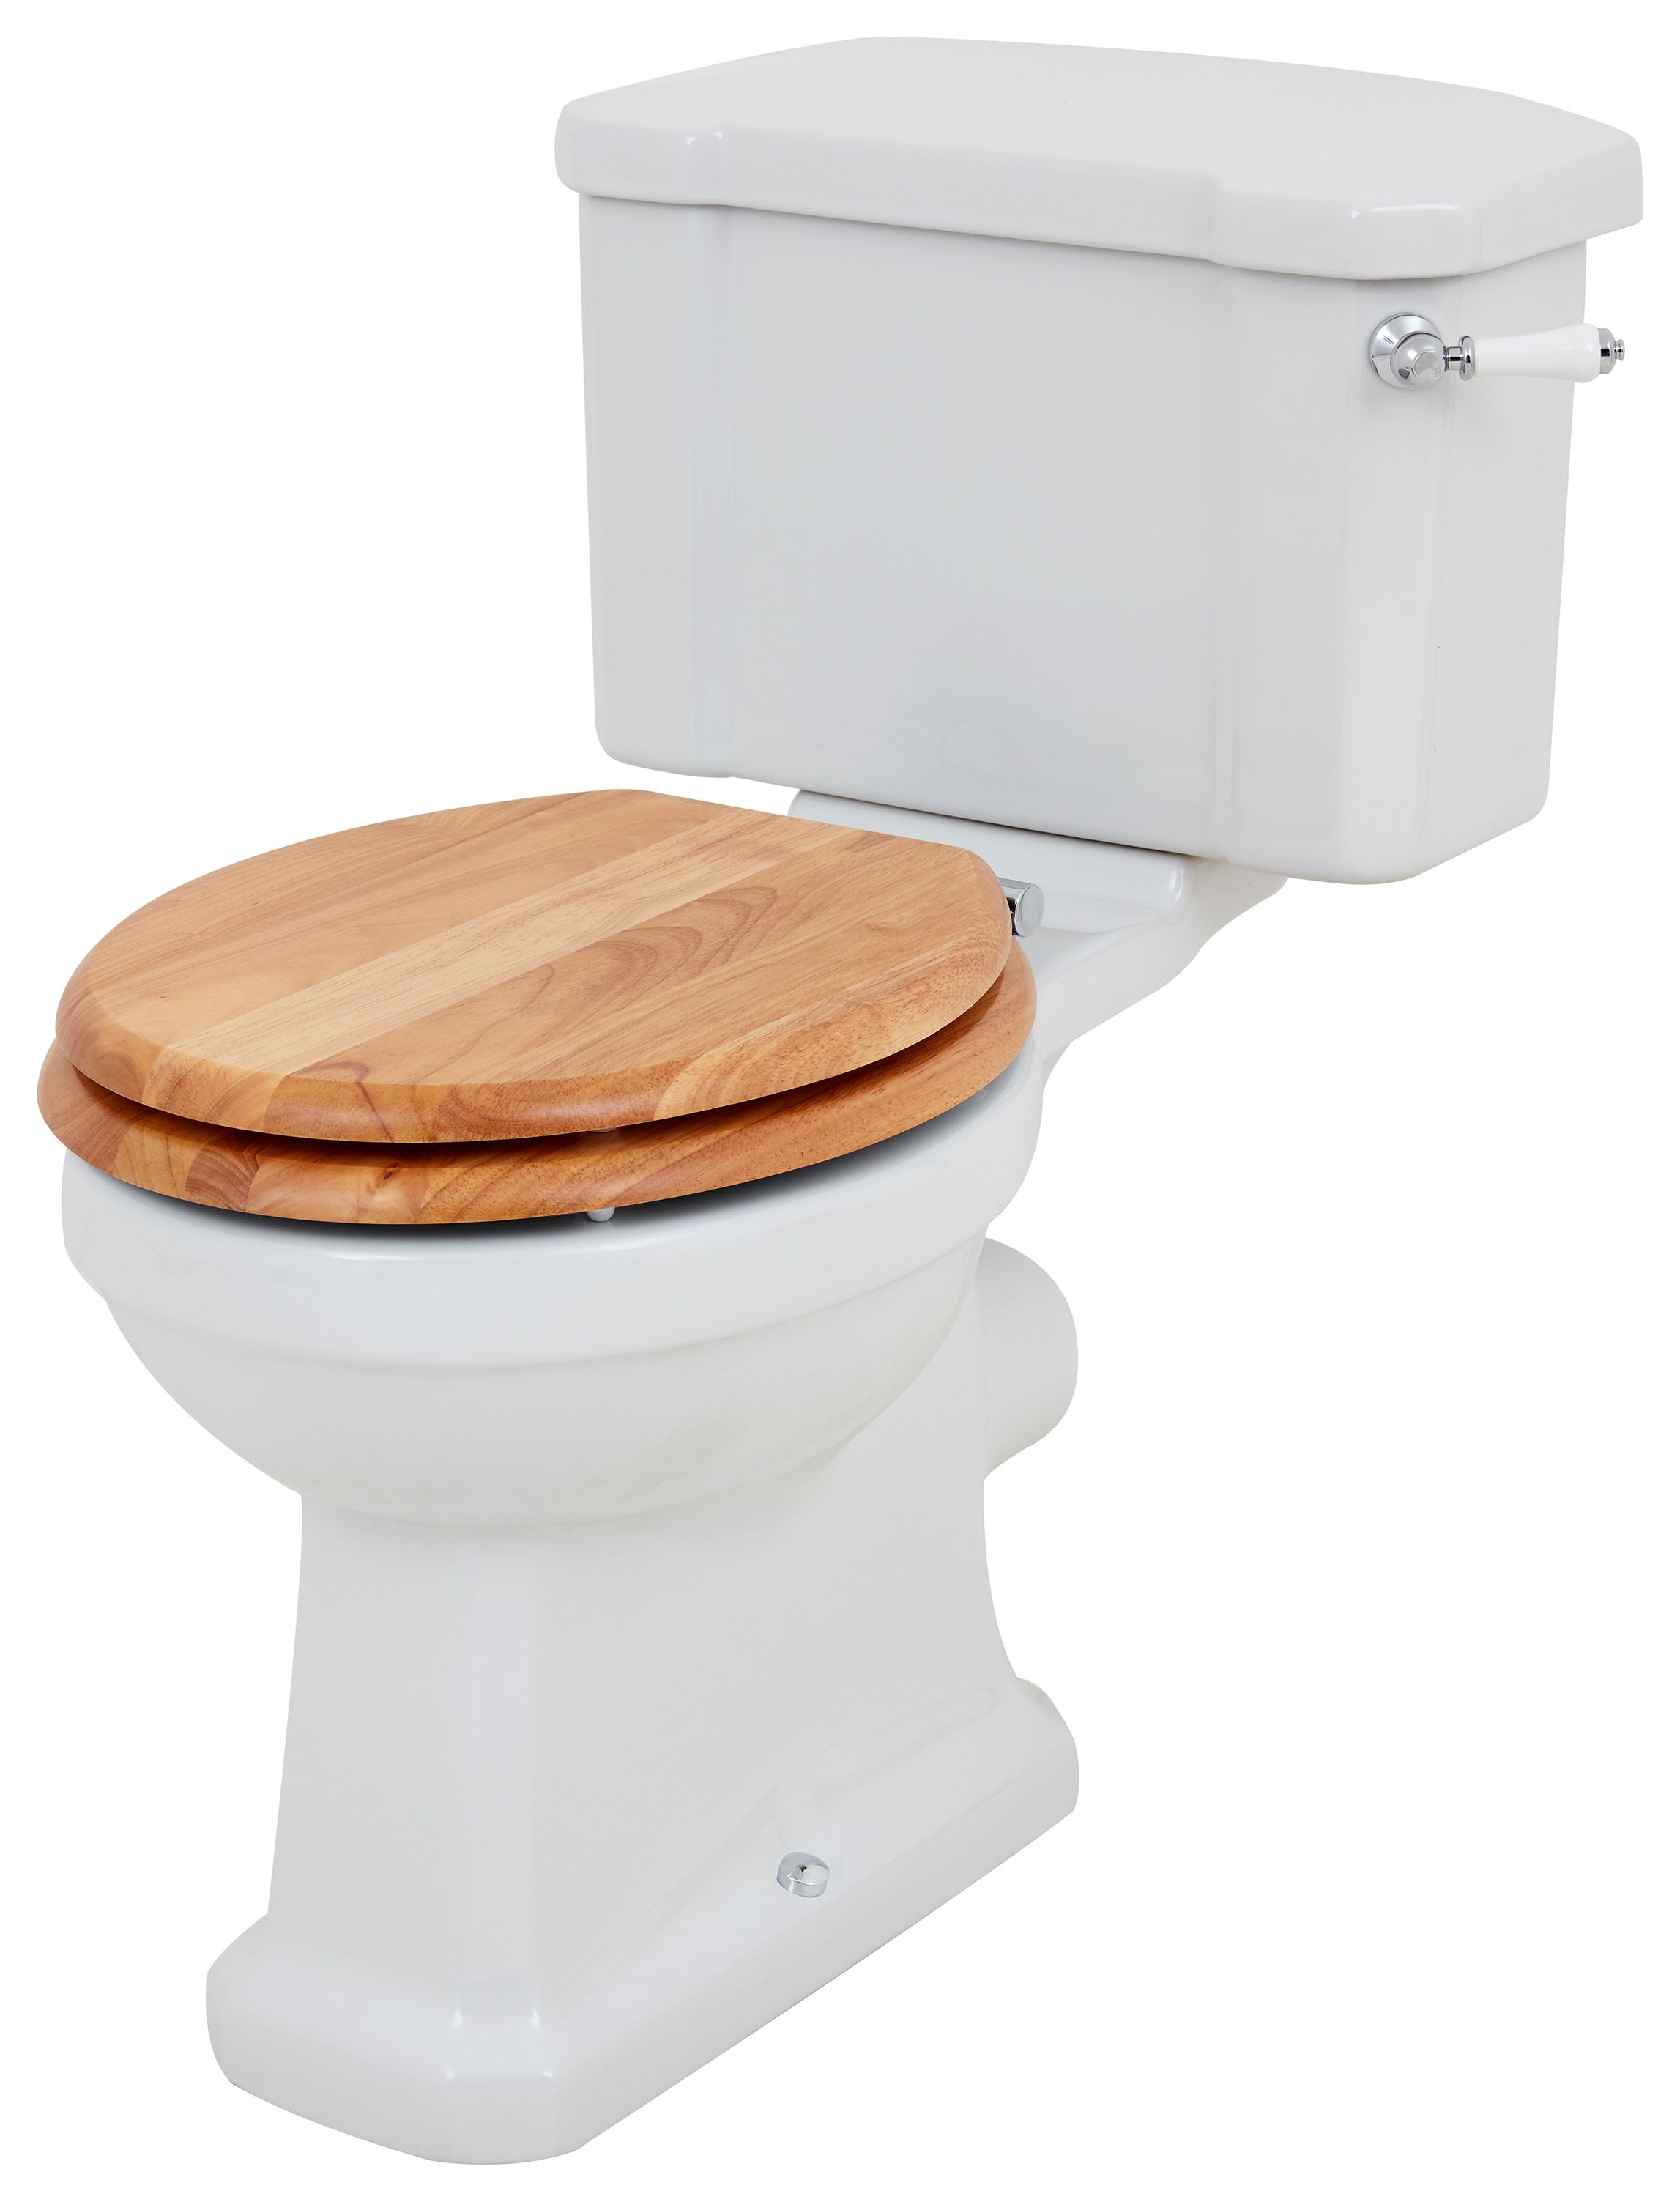 Wickes Oxford Traditional Close Coupled Toilet Pan, Cistern & Oak Soft Close Seat